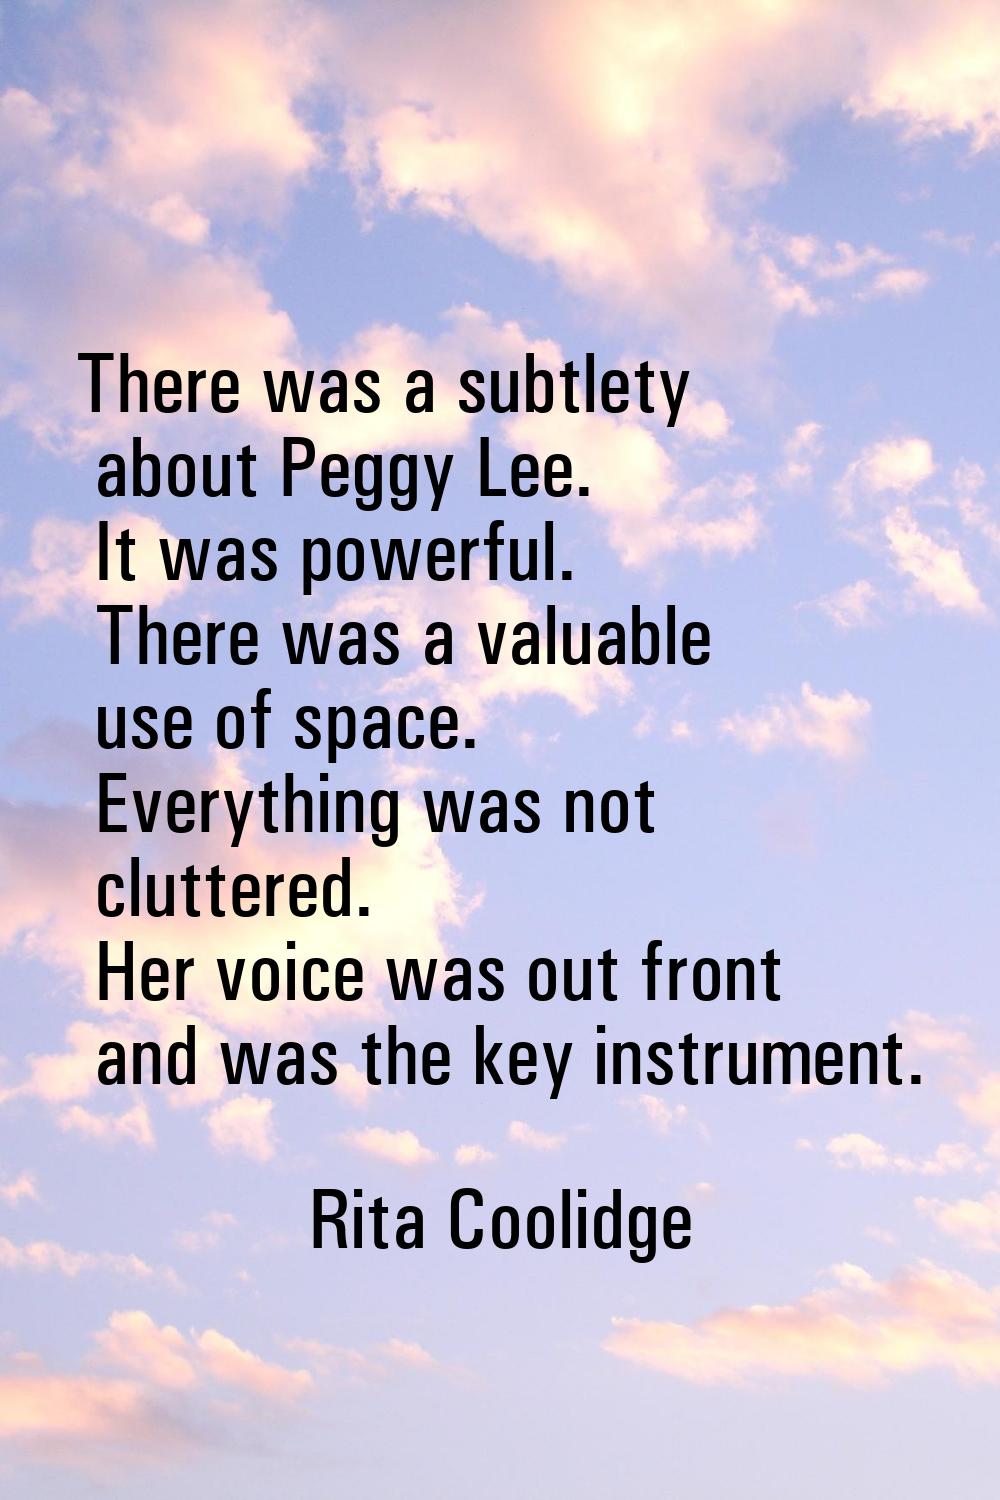 There was a subtlety about Peggy Lee. It was powerful. There was a valuable use of space. Everythin